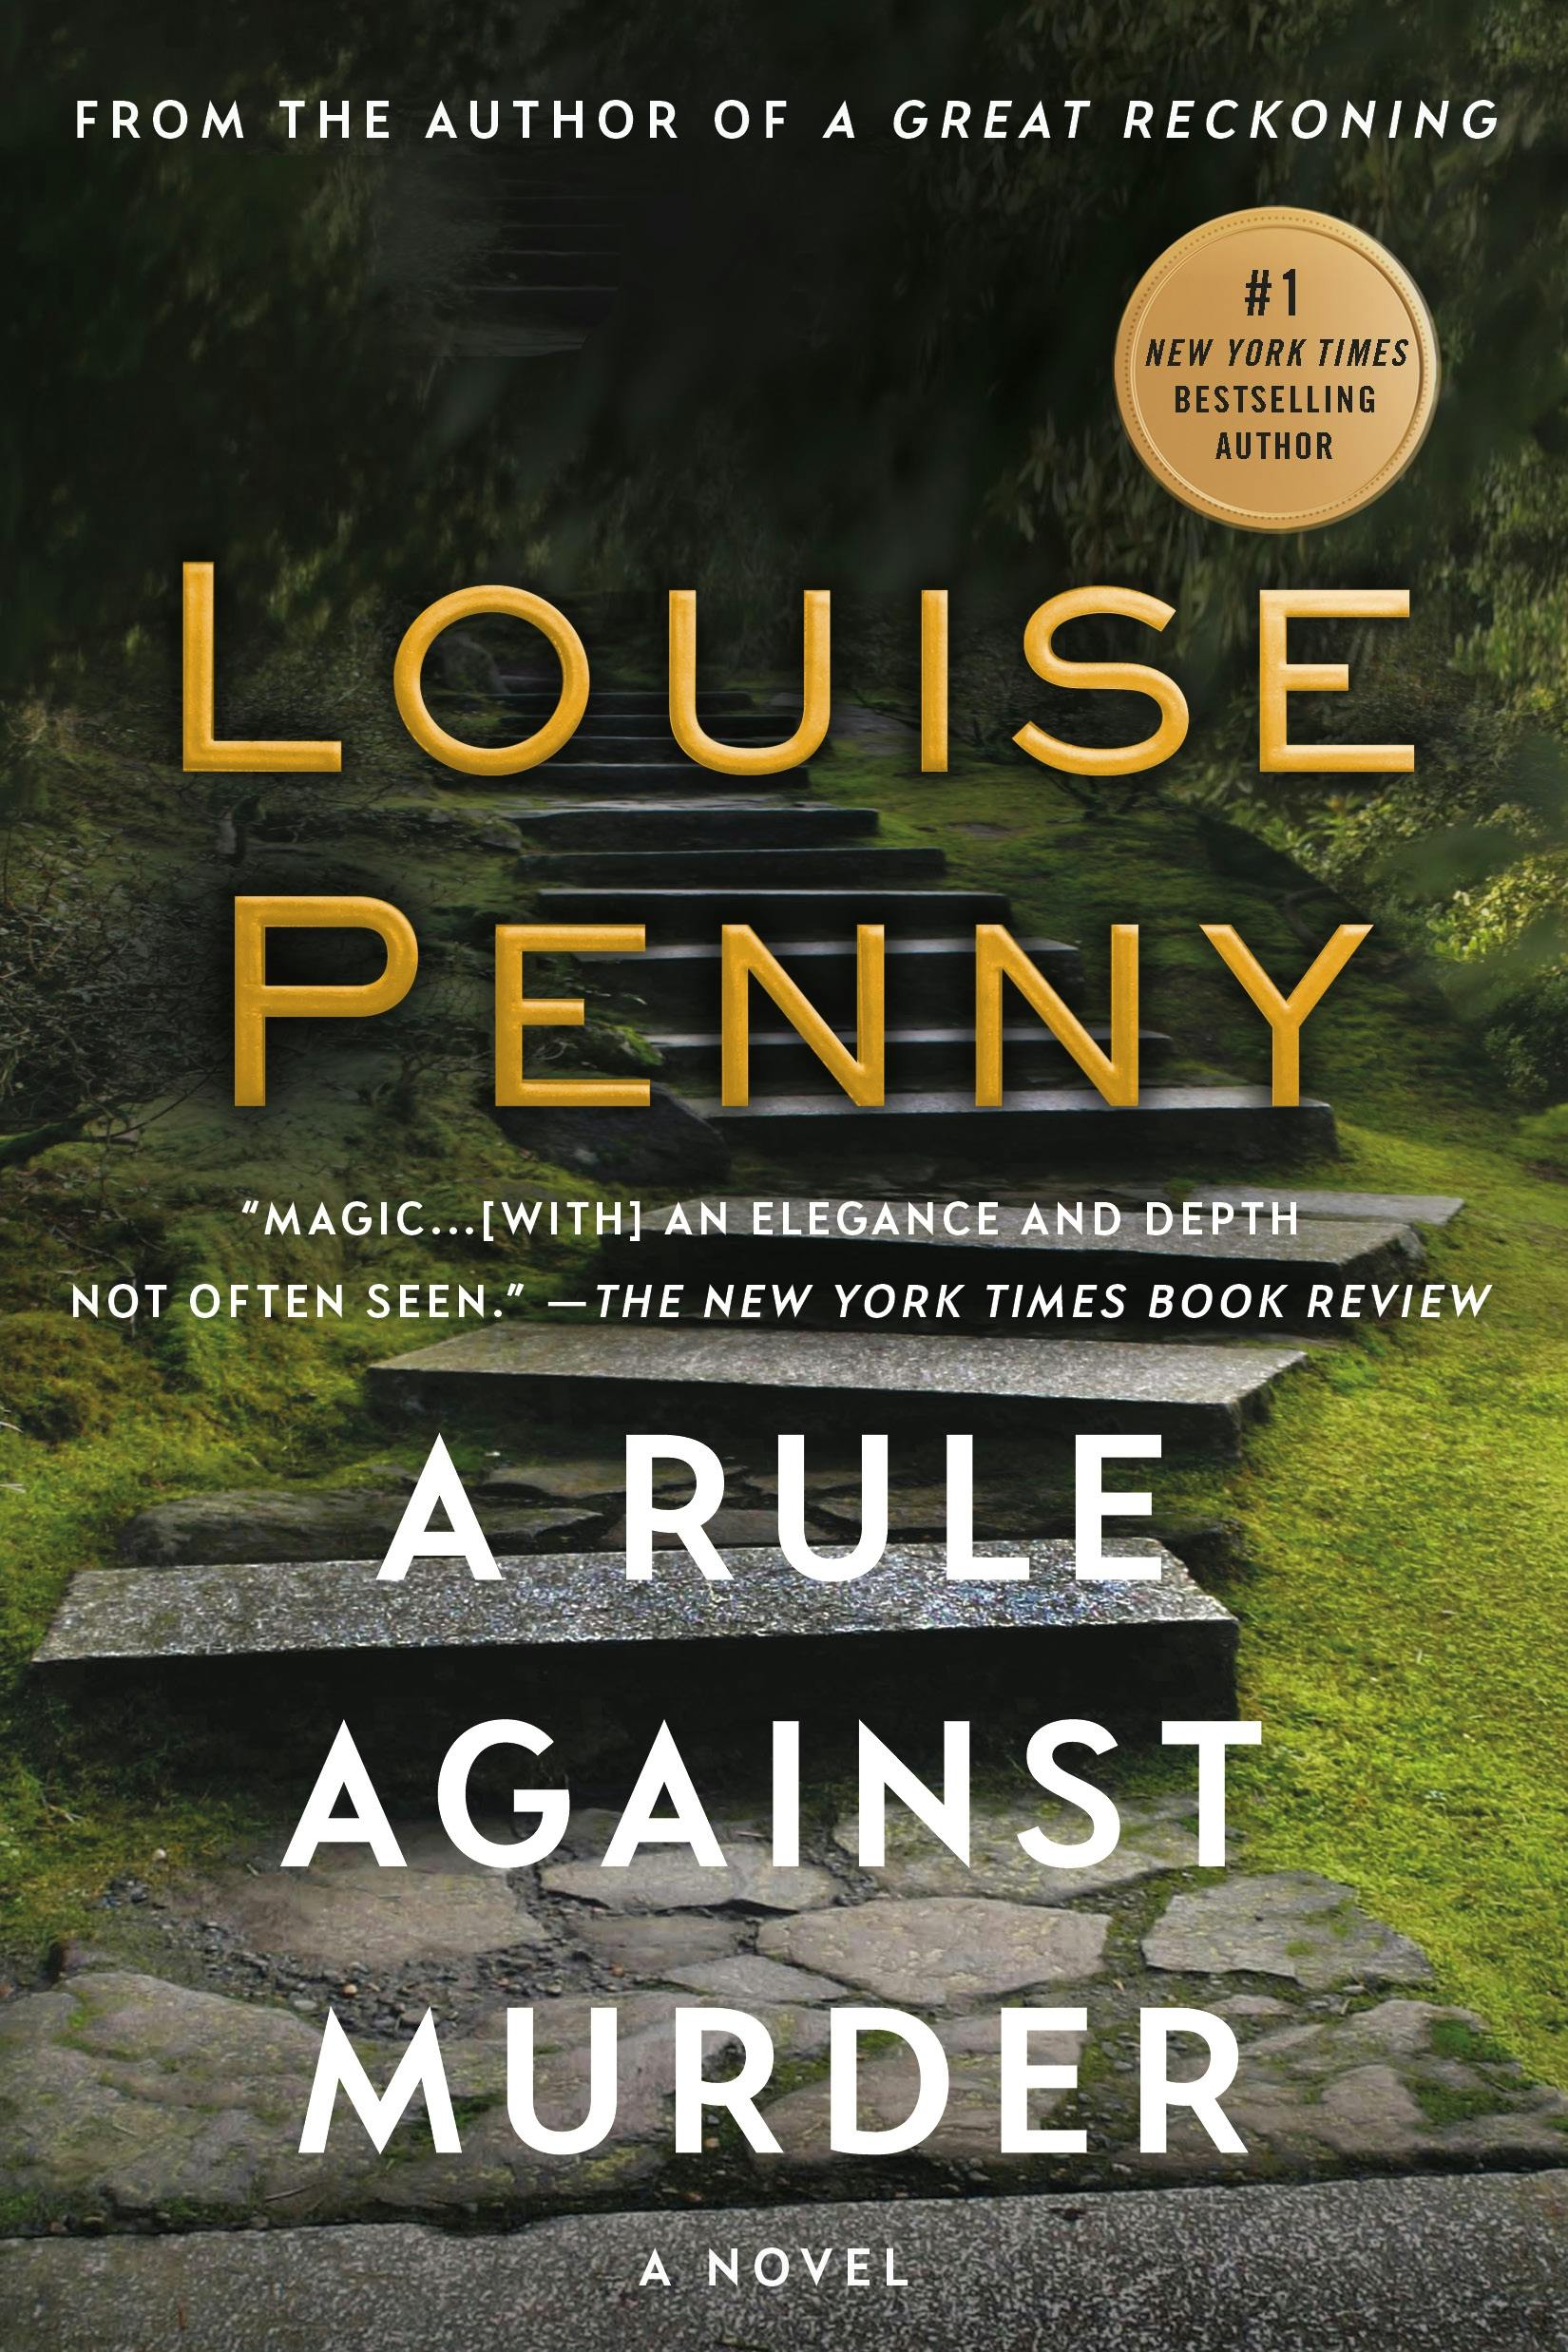 Three Pines: Gamache's Trail - A Louise Penny Inspired Tour